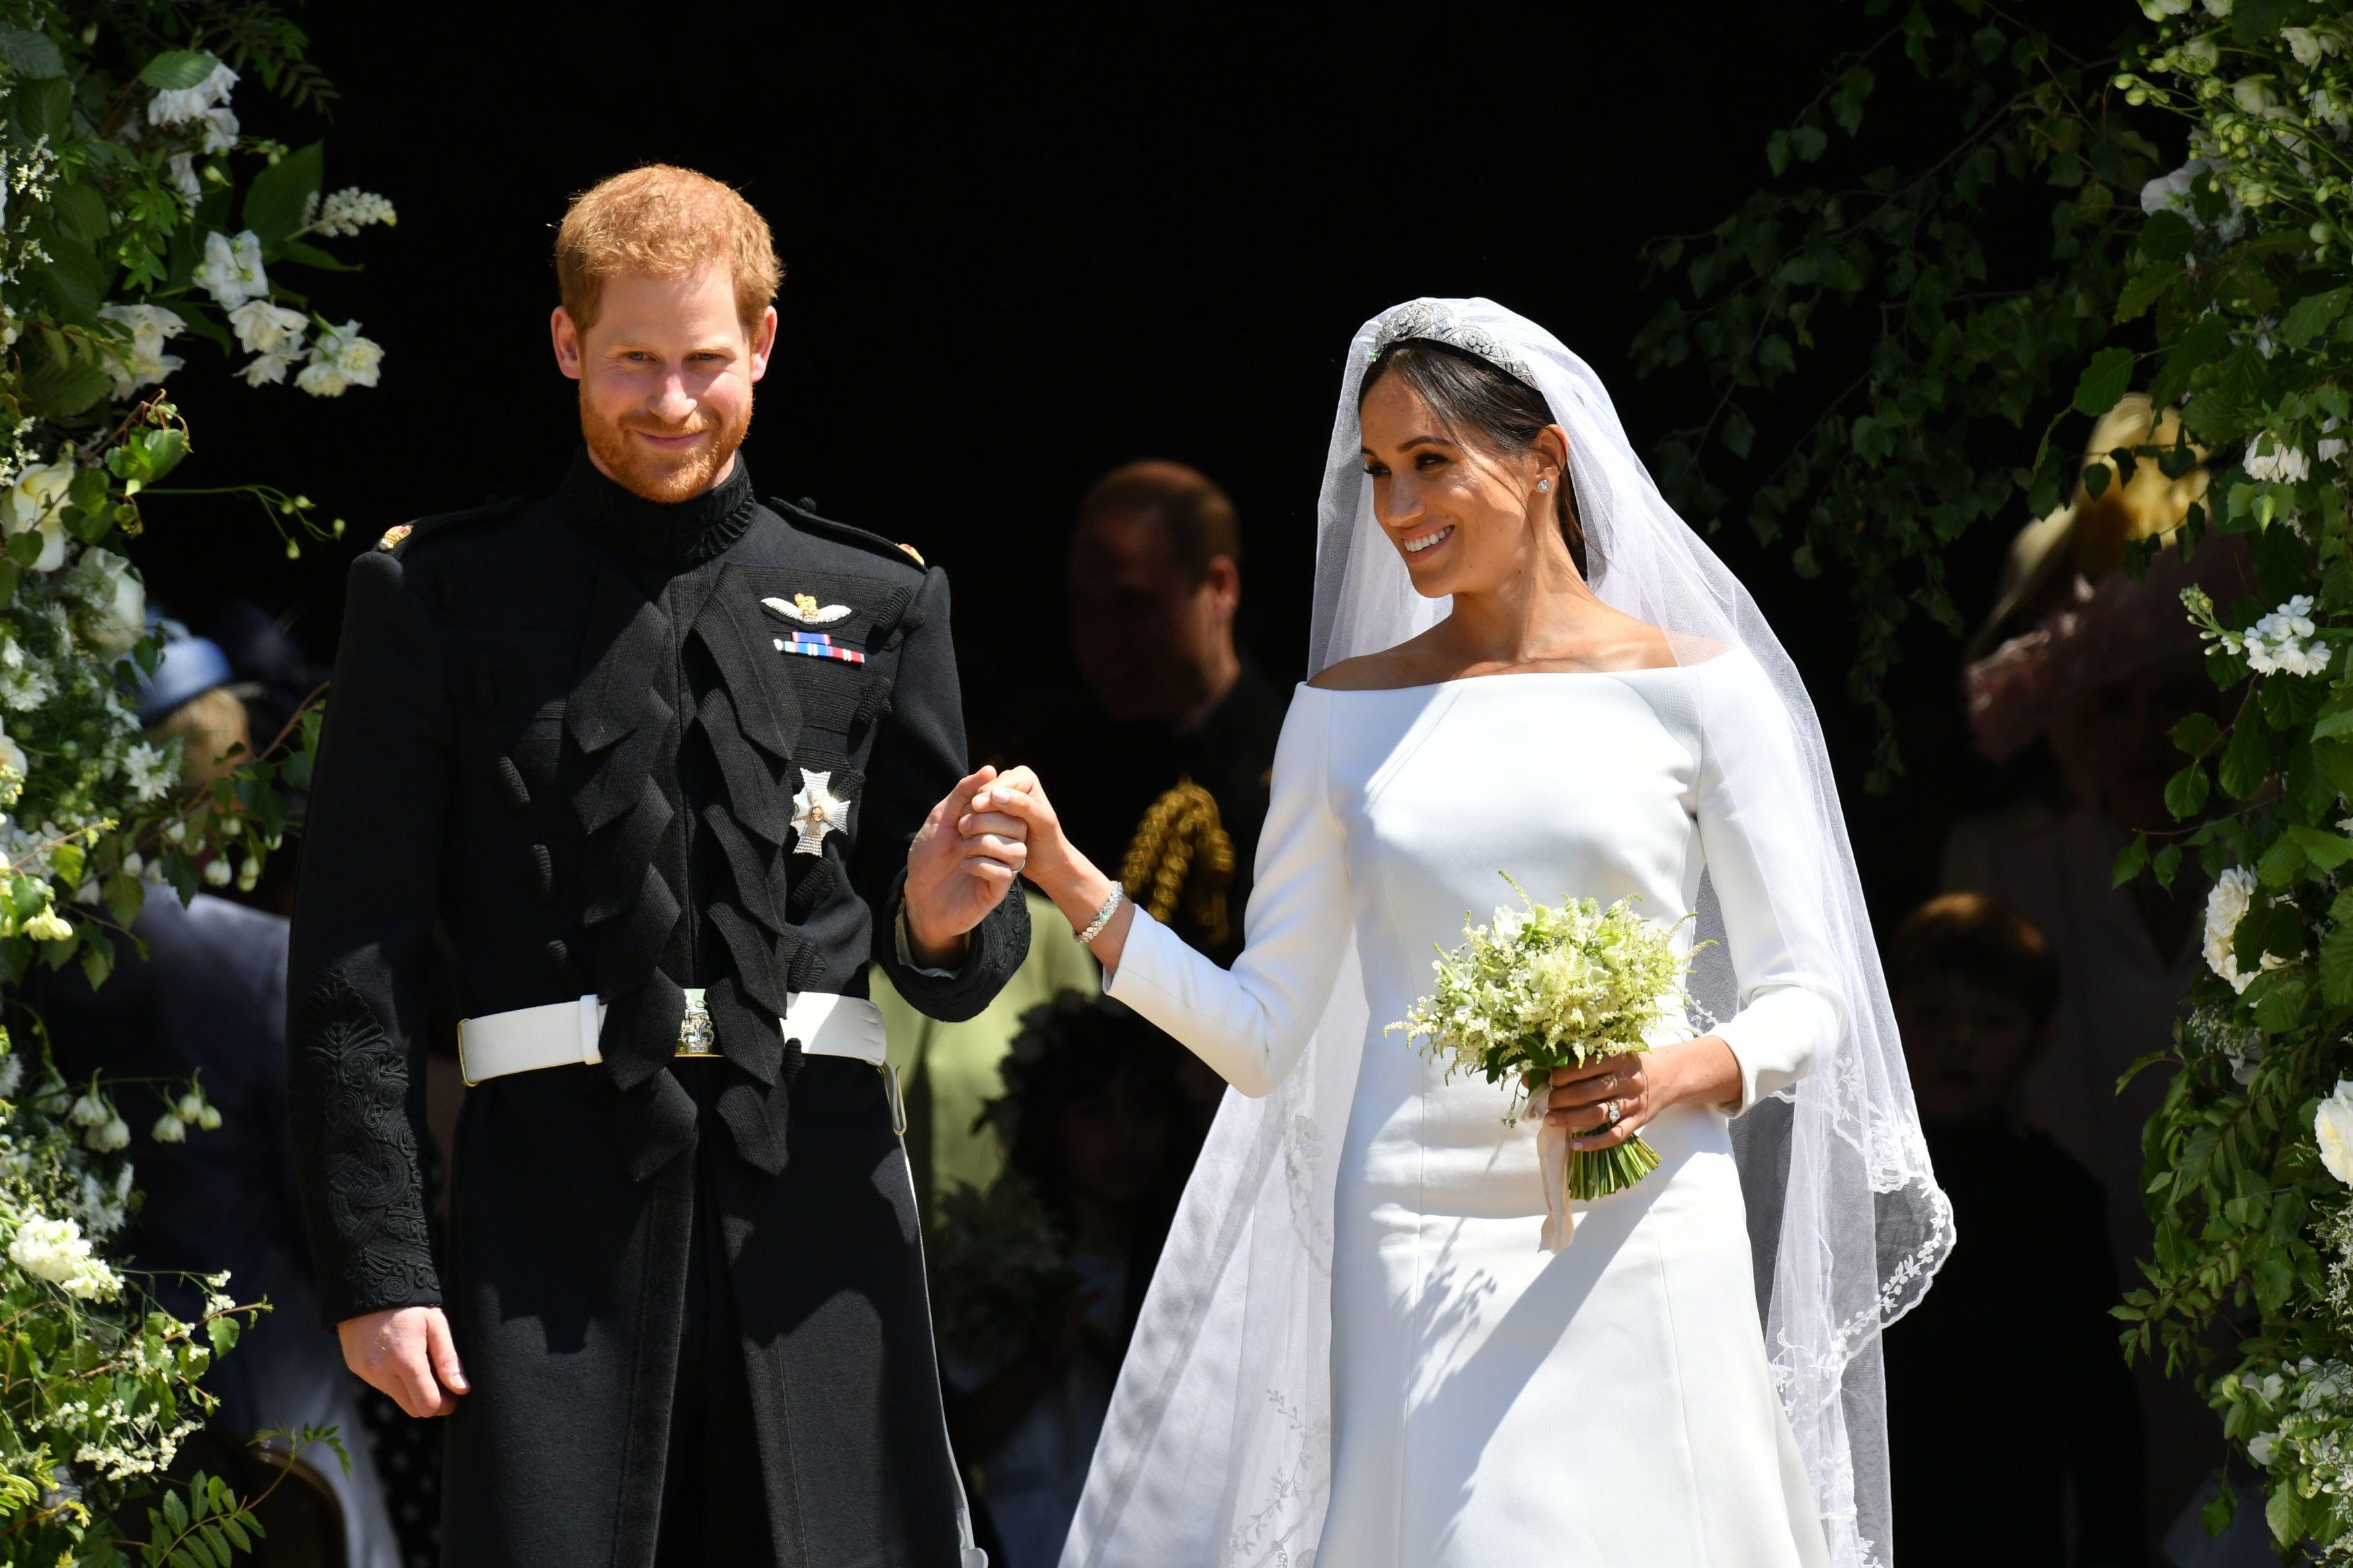 Royal Wedding 2018: Prince Harry and Meghan Markle Are Married